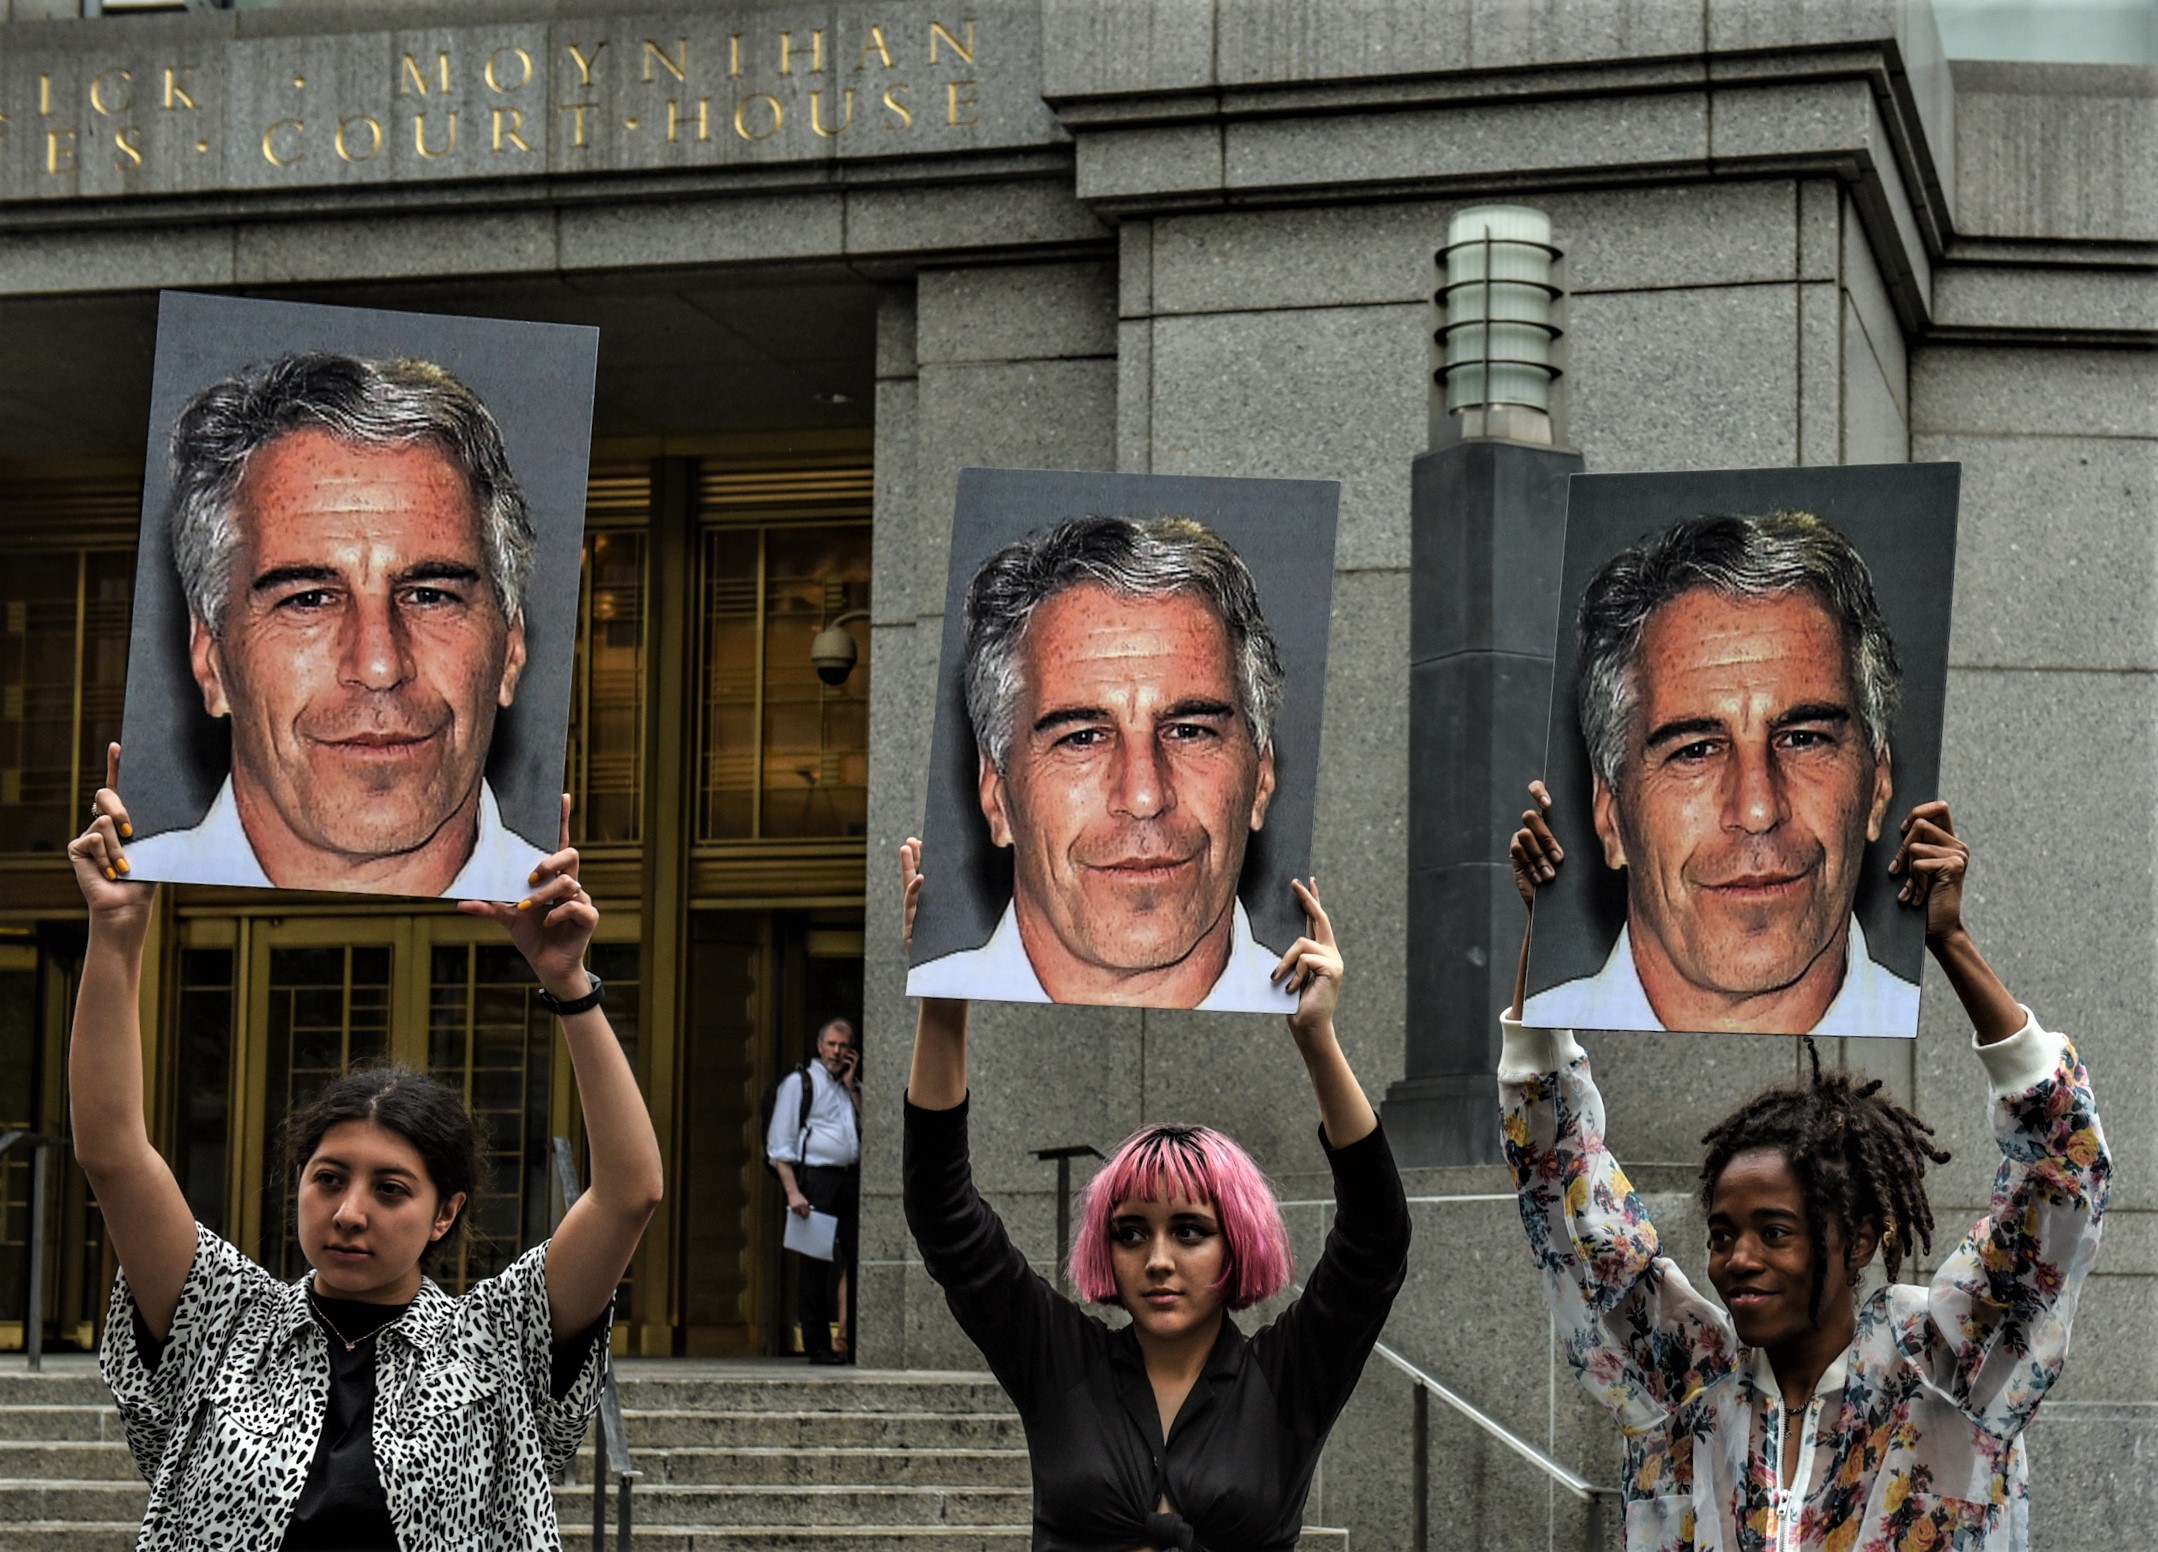 A protest group called "Hot Mess" hold up signs of Jeffrey Epstein in front of the Federal courthouse on July 8, 2019 in New York City. (Image by Stephanie Keith/Getty Images)